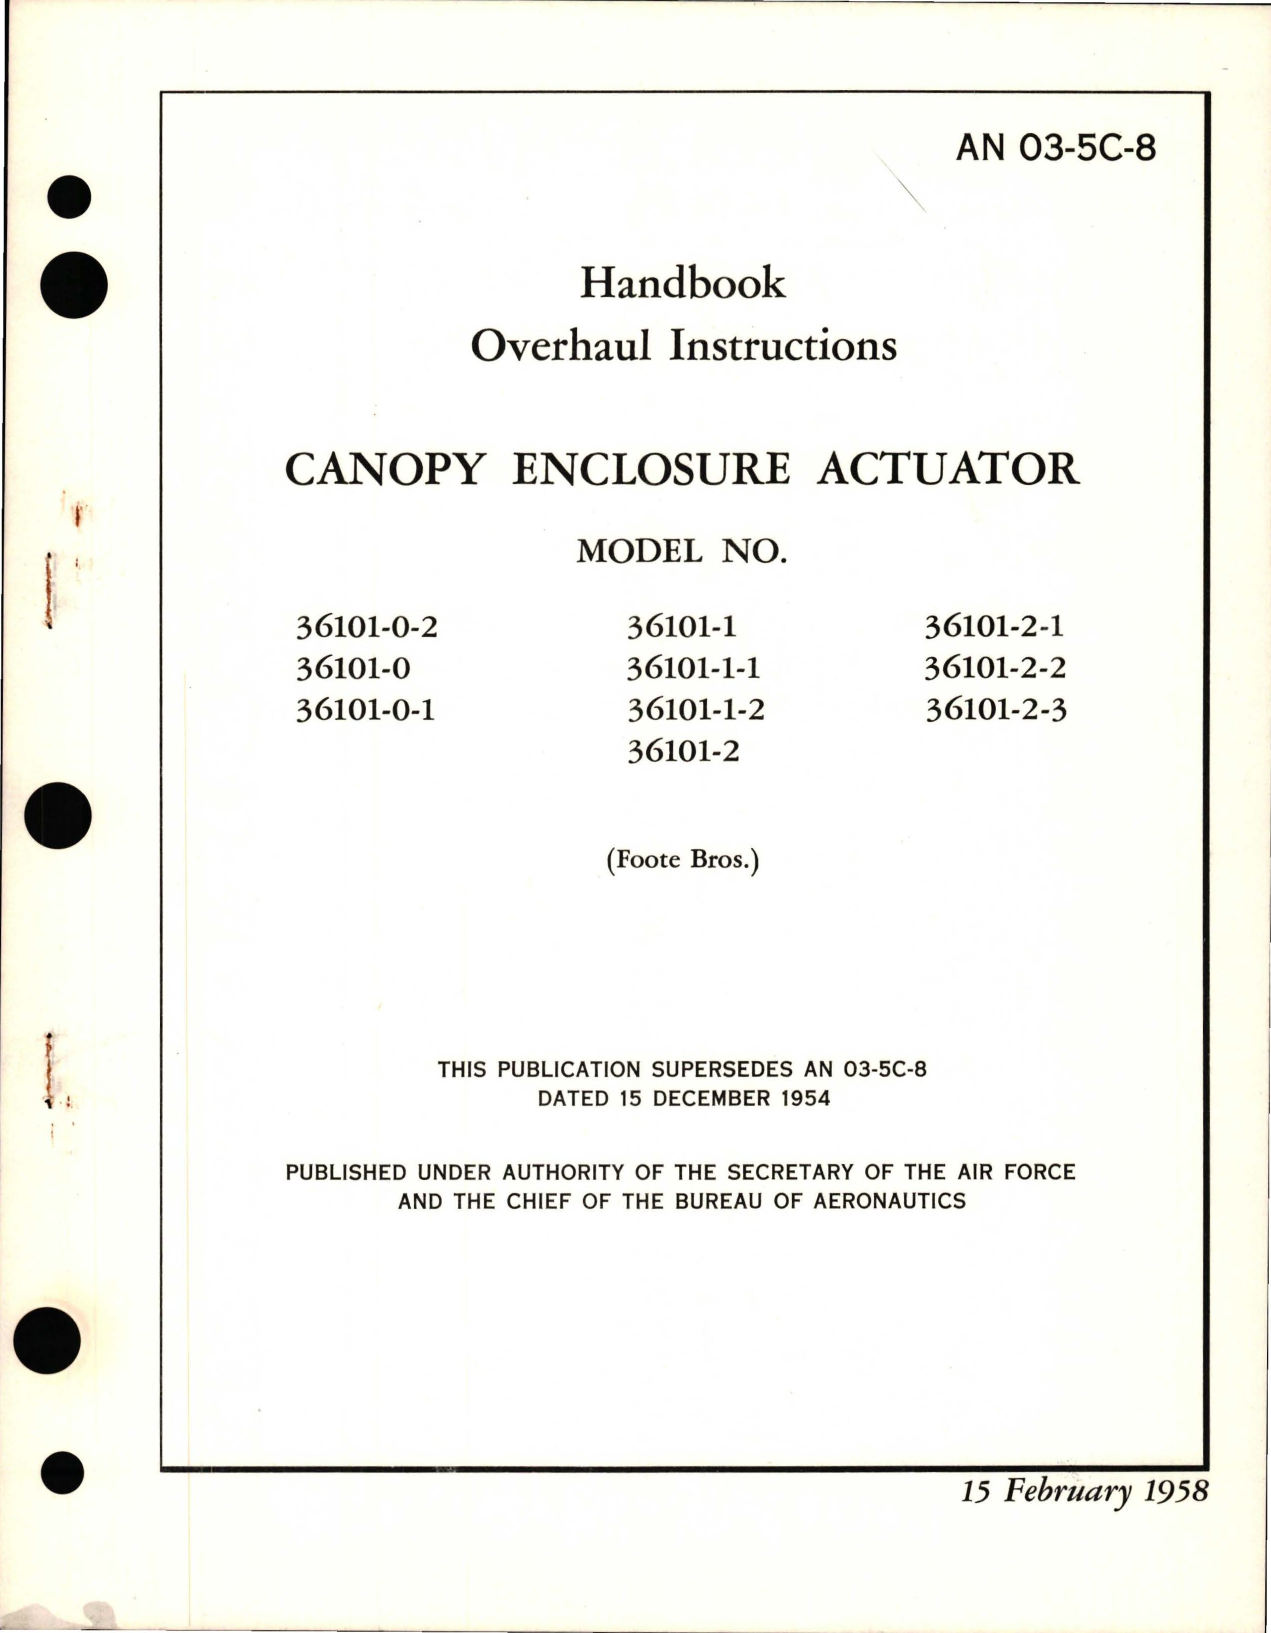 Sample page 1 from AirCorps Library document: Overhaul Instructions for Canopy Enclosure Actuator - 